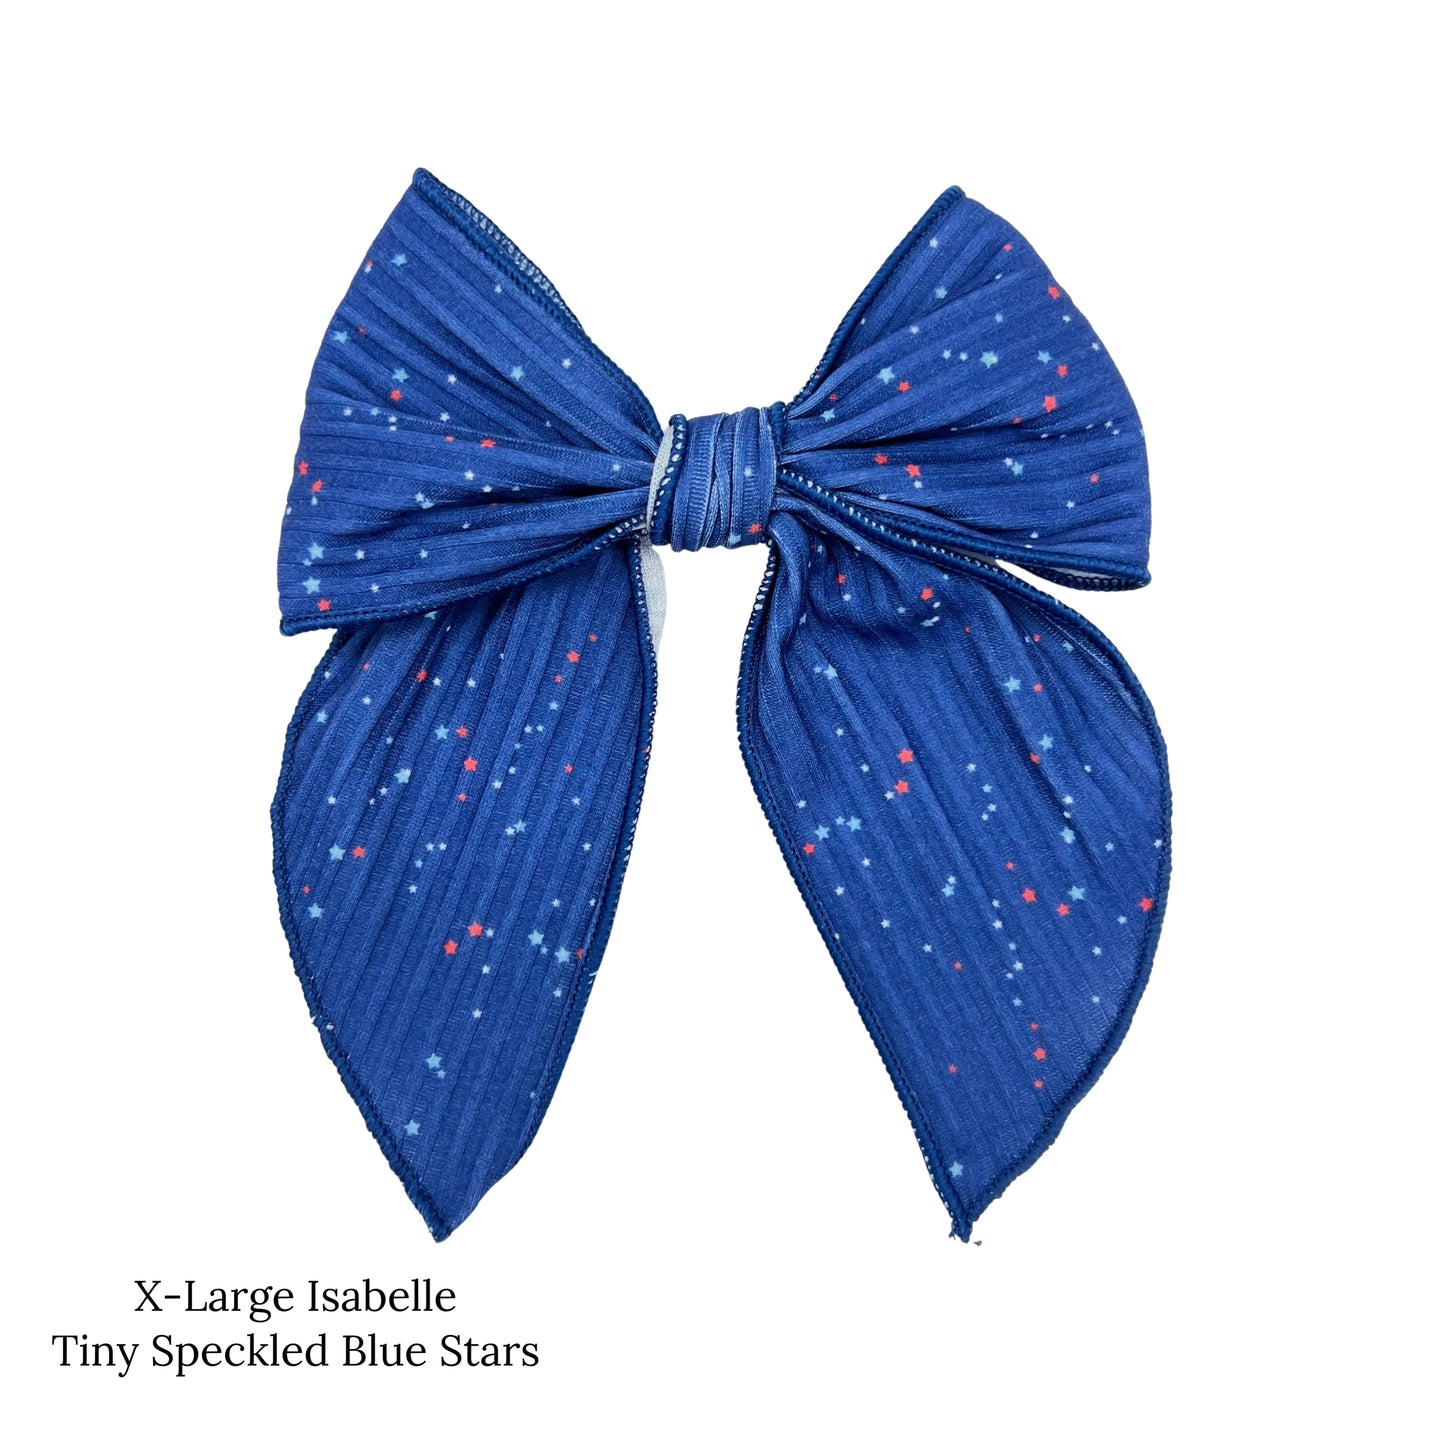 Tiny Speckled Blue Stars Ribbed Hair Bow Strips